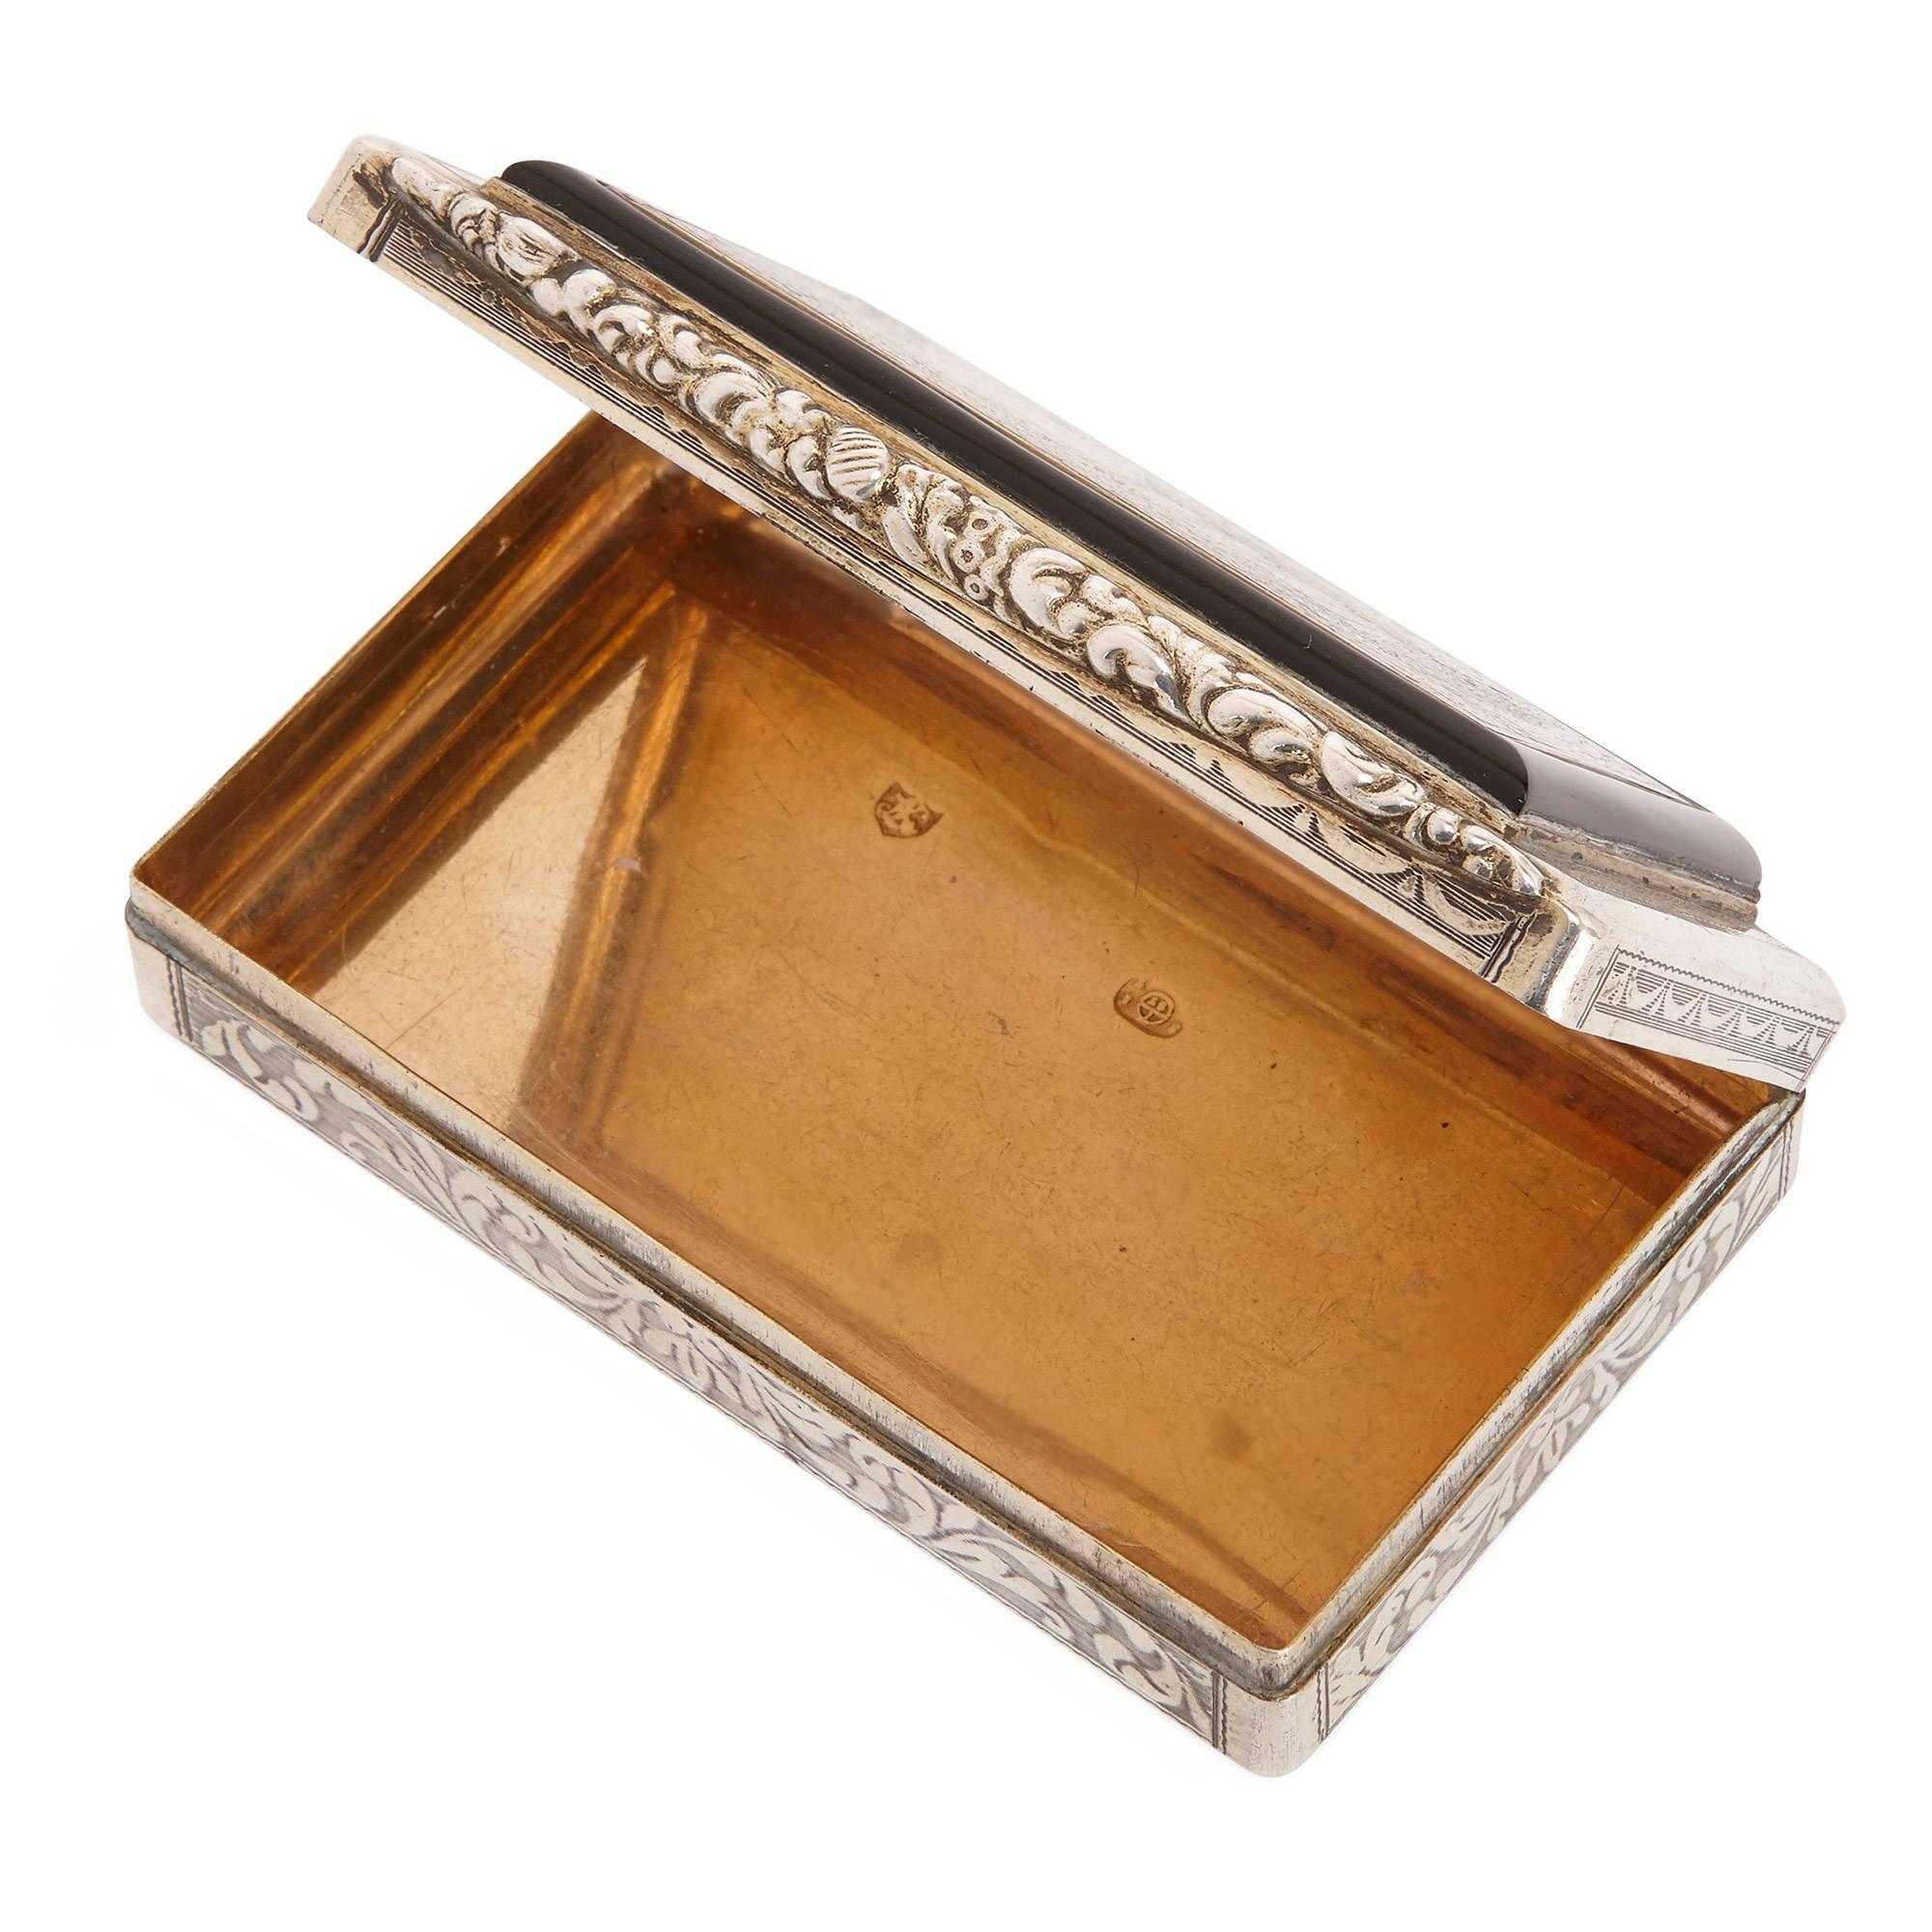 The small rectangular silver snuff box, chased with foliage decorations and featuring a hinged back, is set with a detailed micromosaic plaque on top. The plaque depicts a rural landscape with Roman ruins and two figures standing in front of the